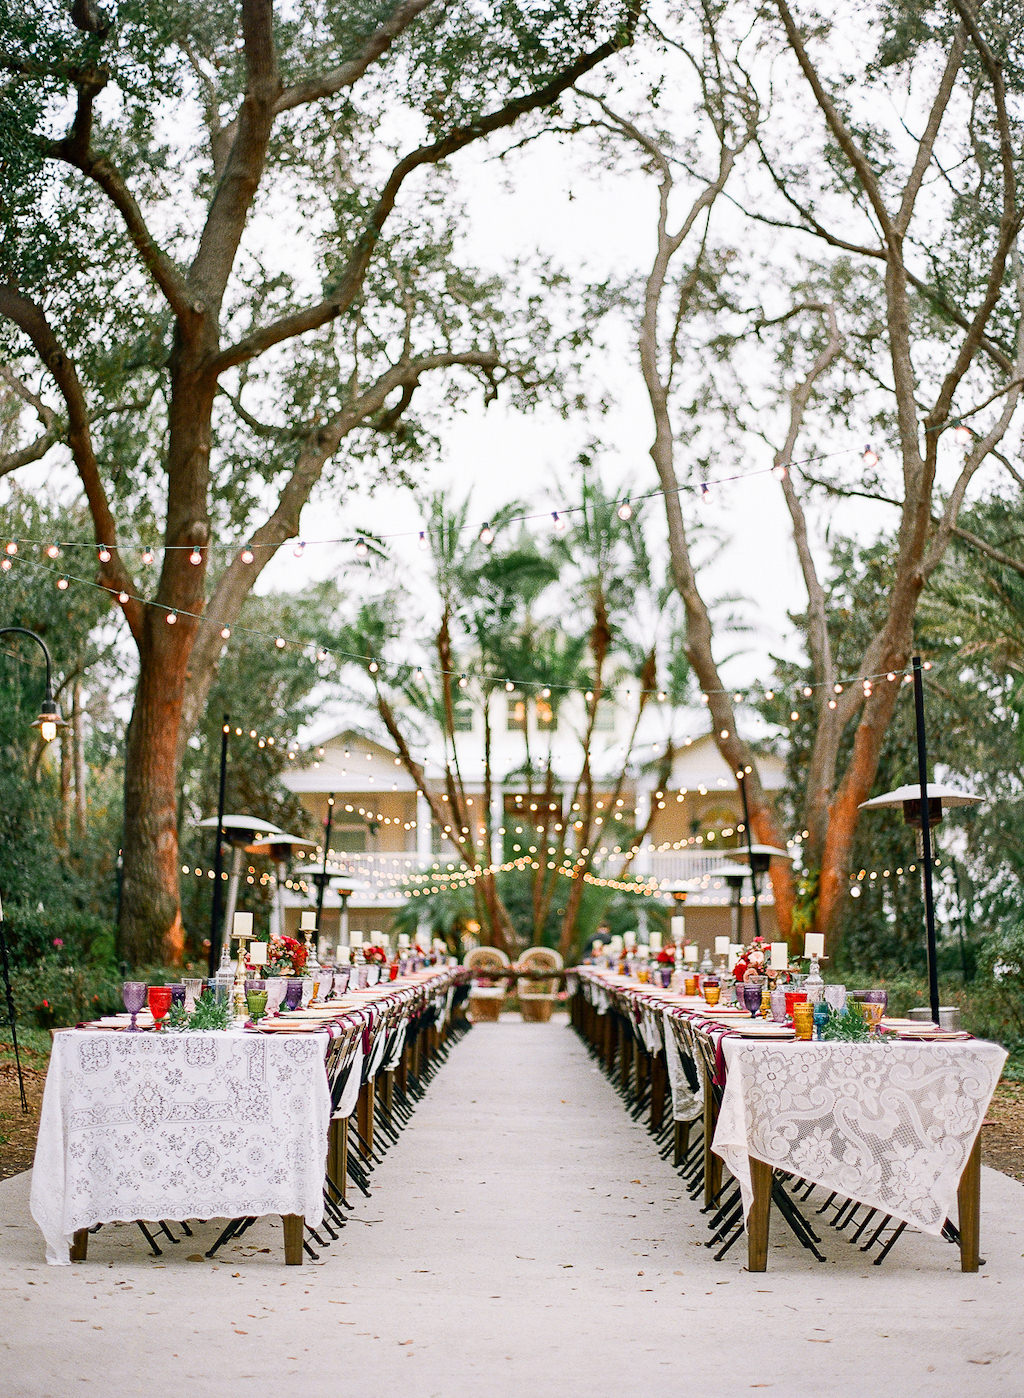 Boho Chic Vintage Inspired Wedding Reception Outdoor Lakeland Florida Wedding Decor, Long Feasting Tables with Lace Tablecloths